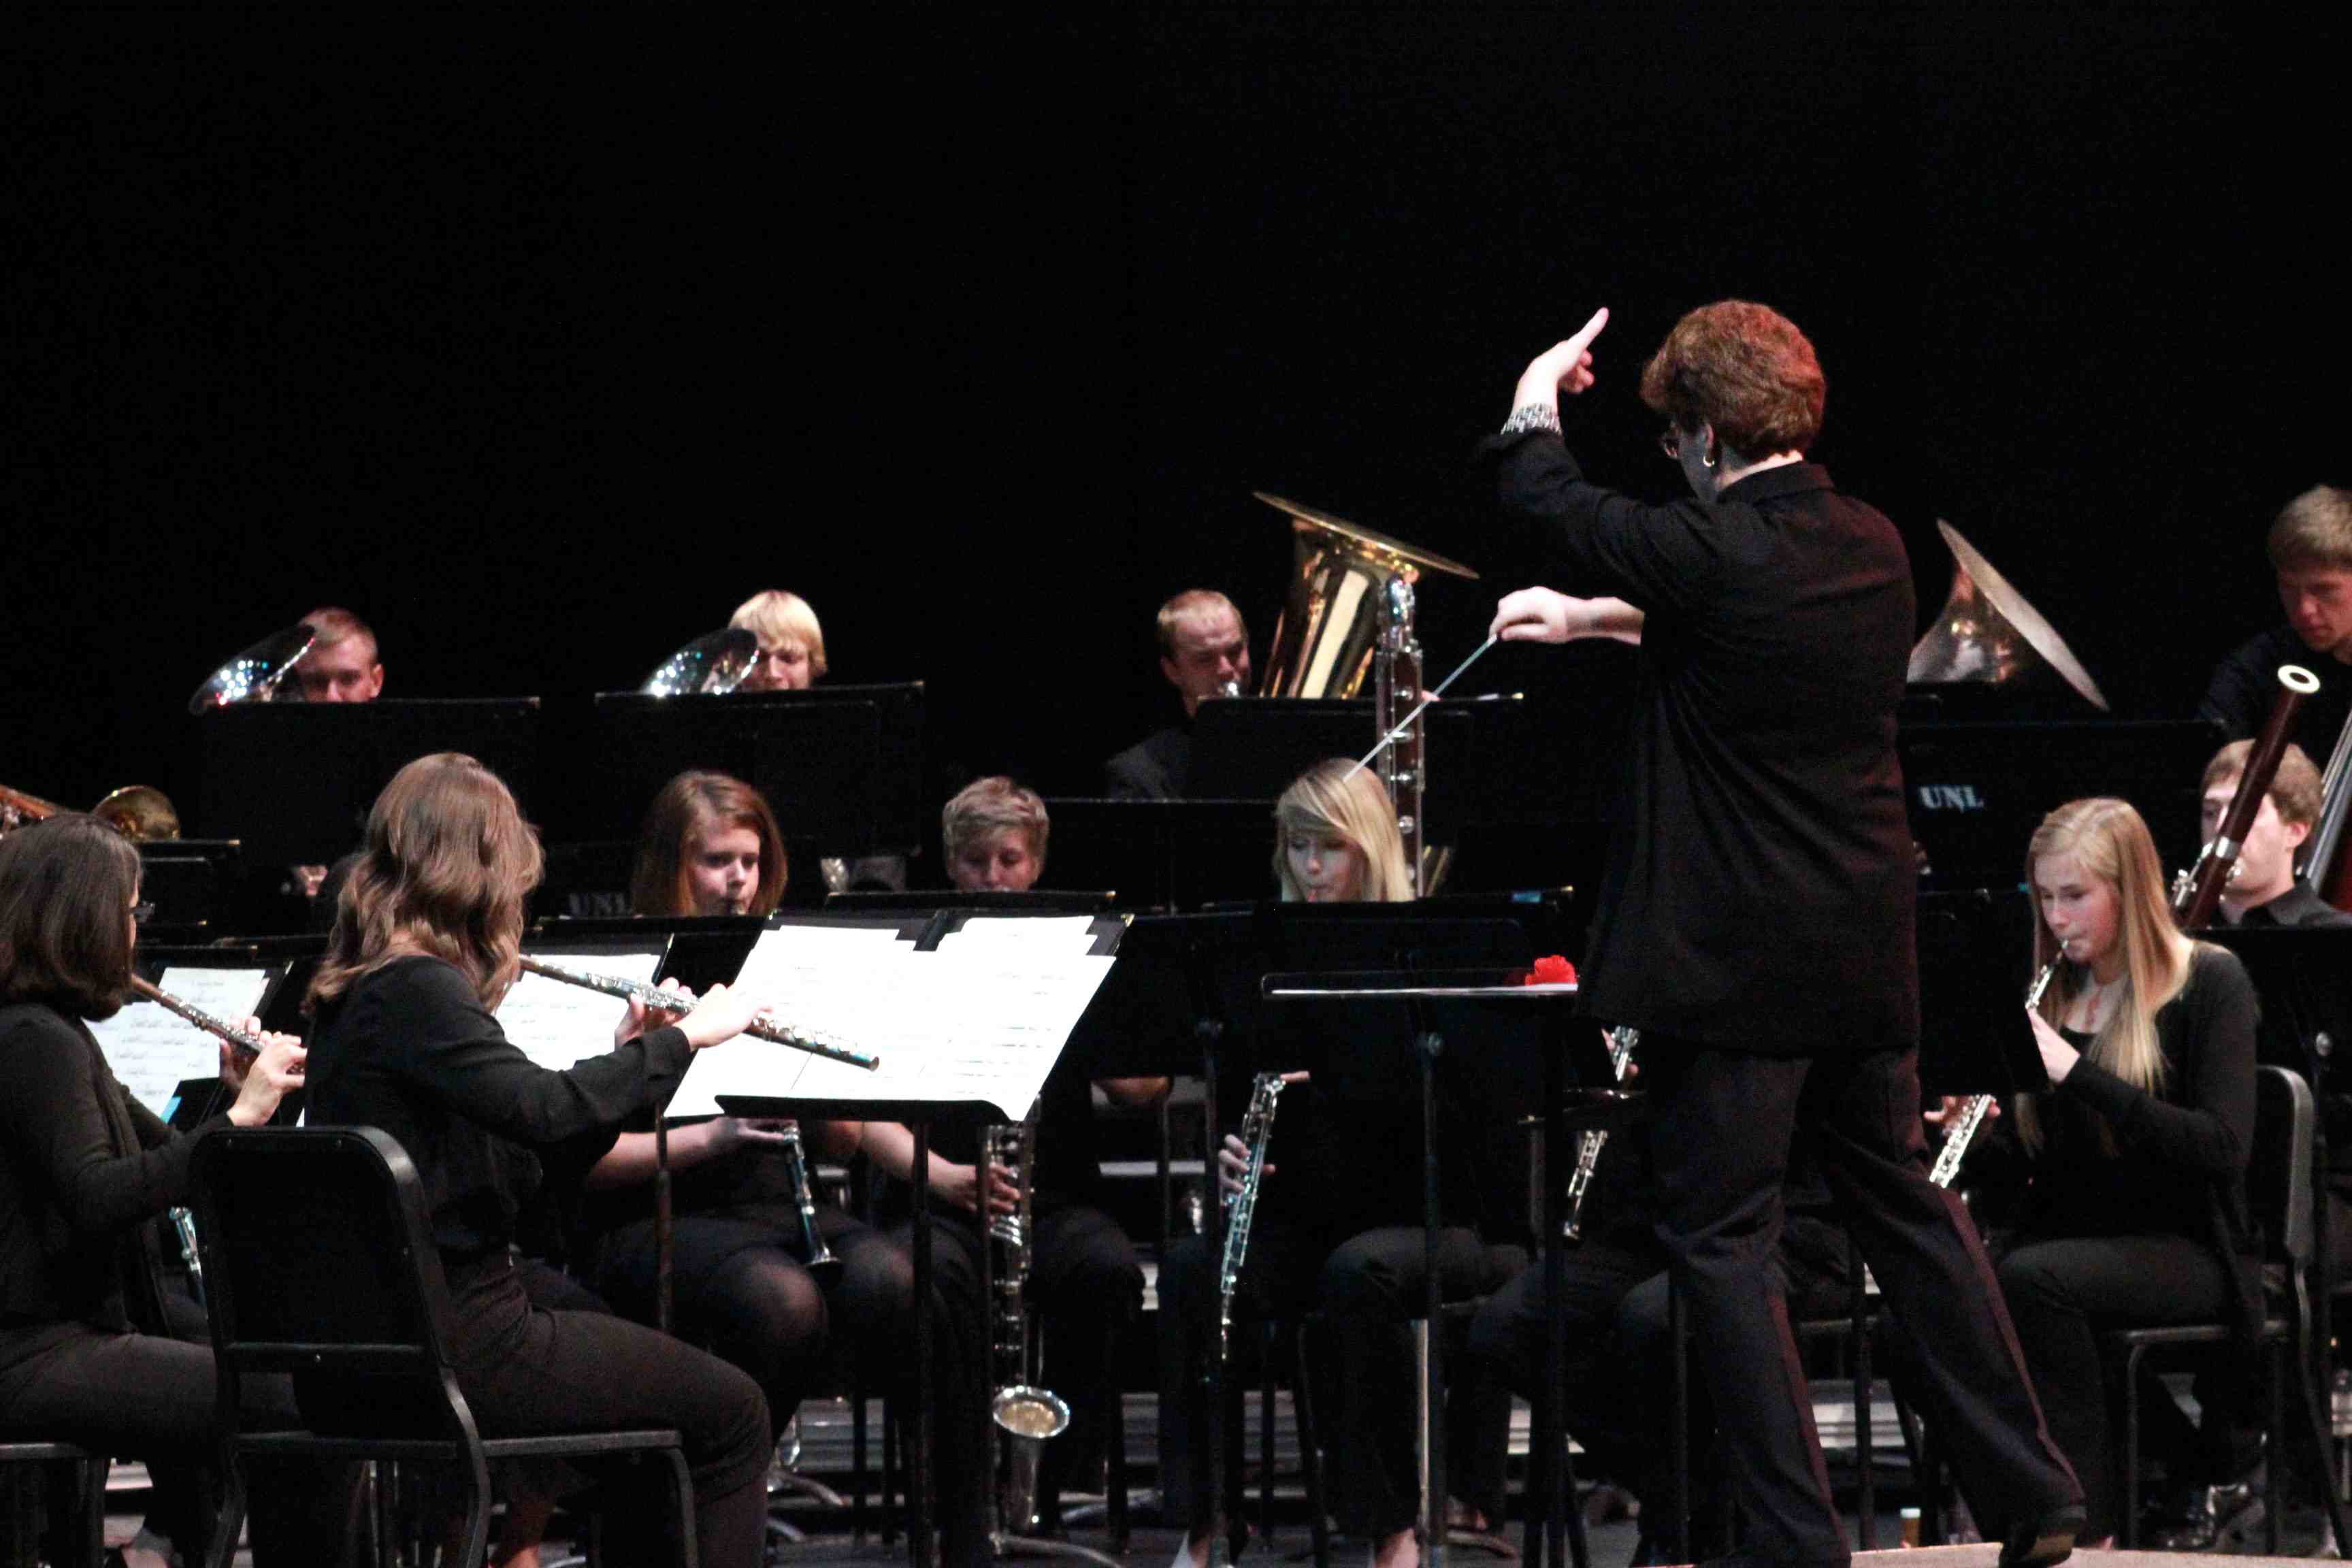 The Wind Ensemble performs Feb. 28 at 3 p.m.